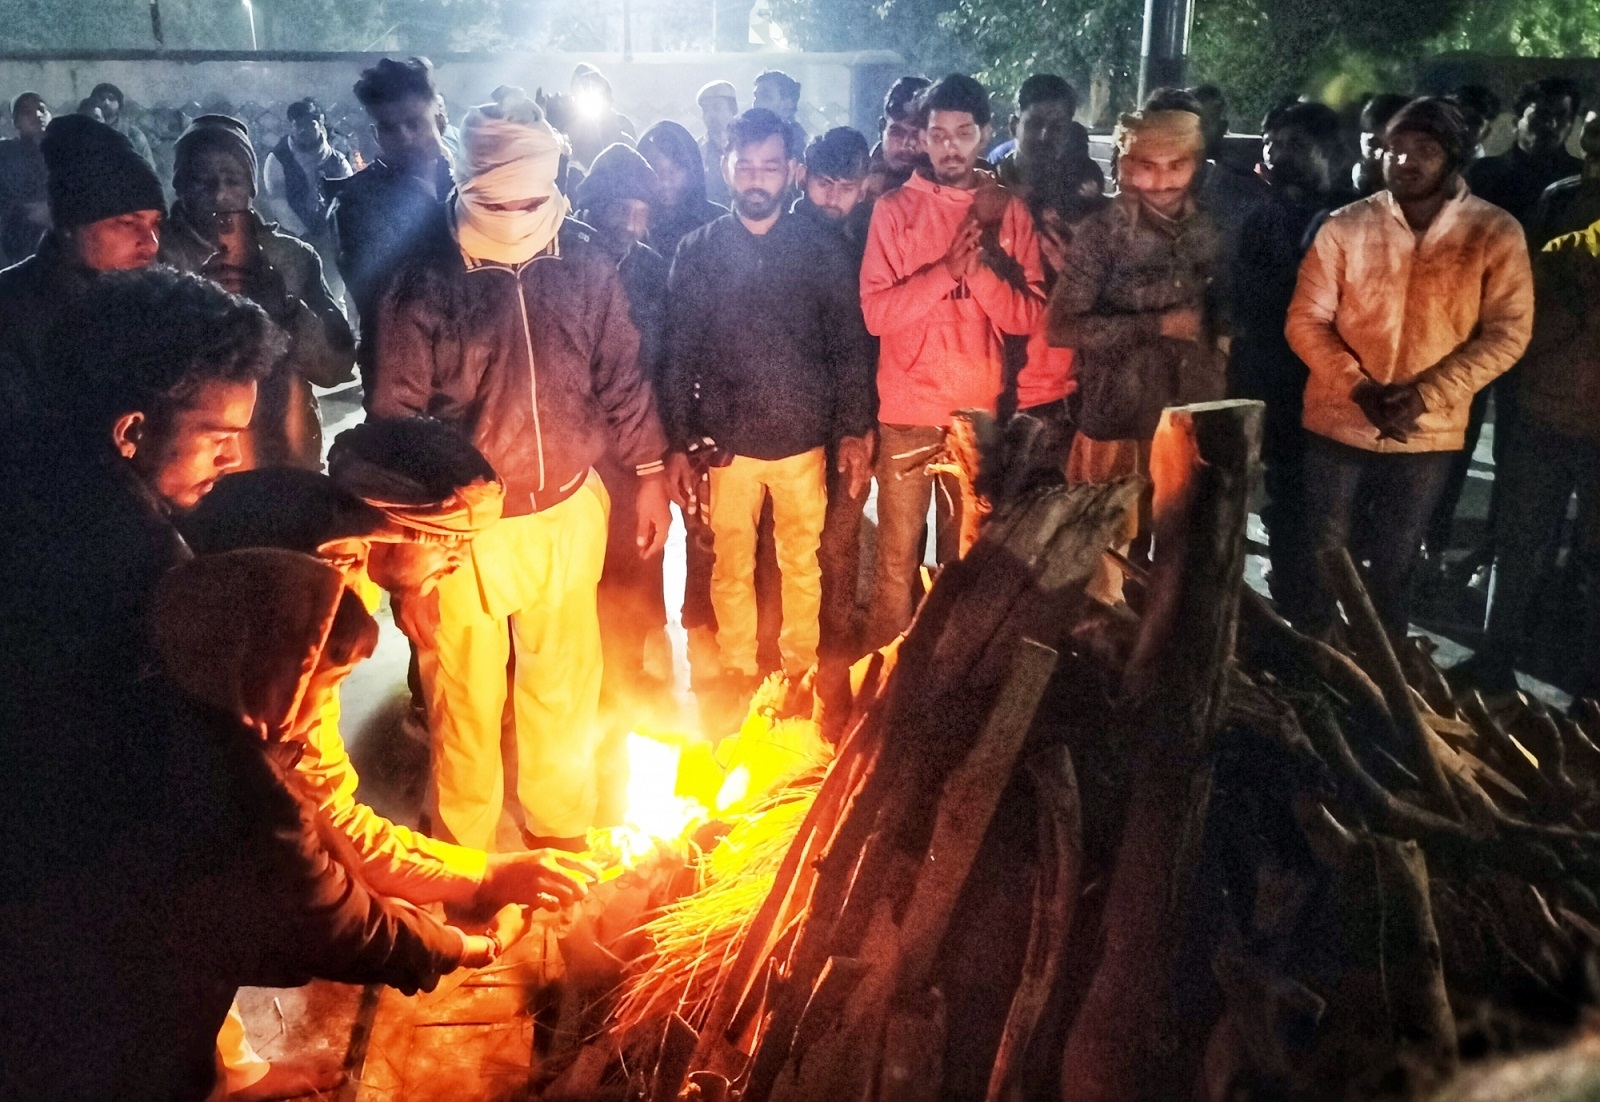 New Delhi: Family members and relatives during the last rites of the deceased woman of the Kanjhawala incident who died after being hit and dragged by a car, at a crematorium in New Delhi on Tuesday, Jan. 03, 2023. (Wasim Sarvar/IANS)